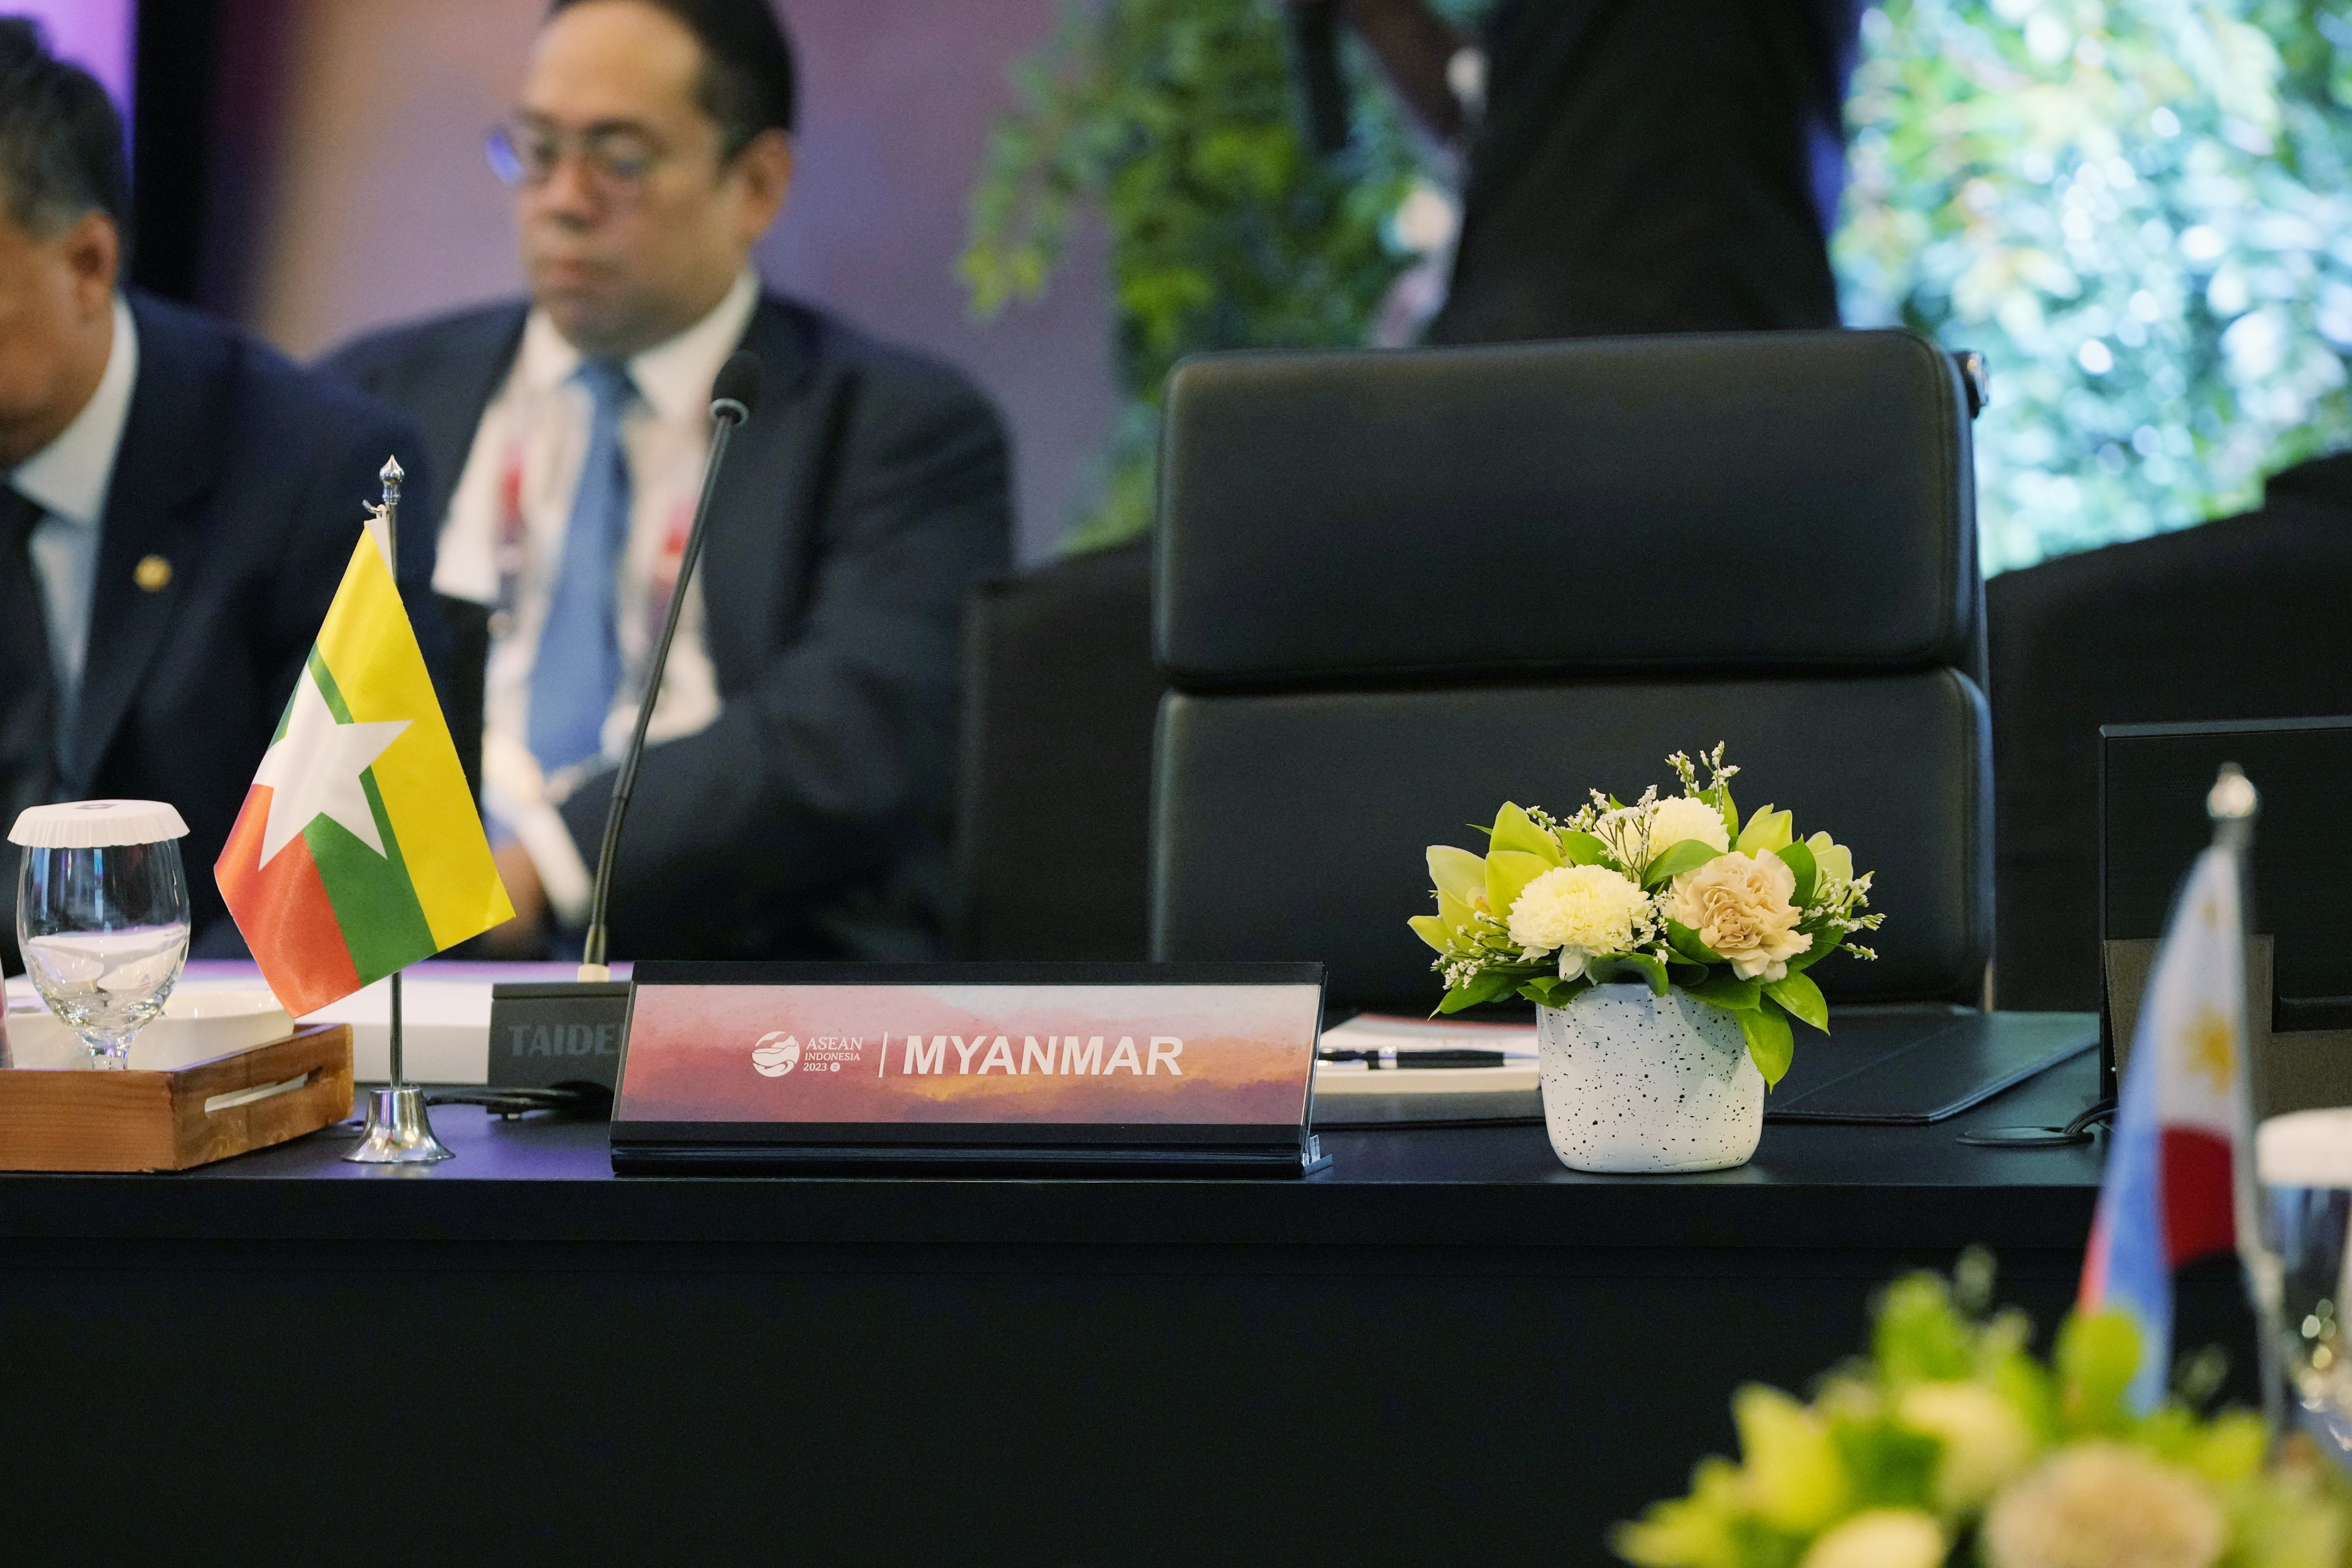 The seat reserved for Myanmar is left empty during the Meeting of the Southeast Asia Nuclear Weapon Free Zone Commission at the Asean Foreign Minister’s Meeting in Jakarta, Indonesia. Photo: Pool/AP